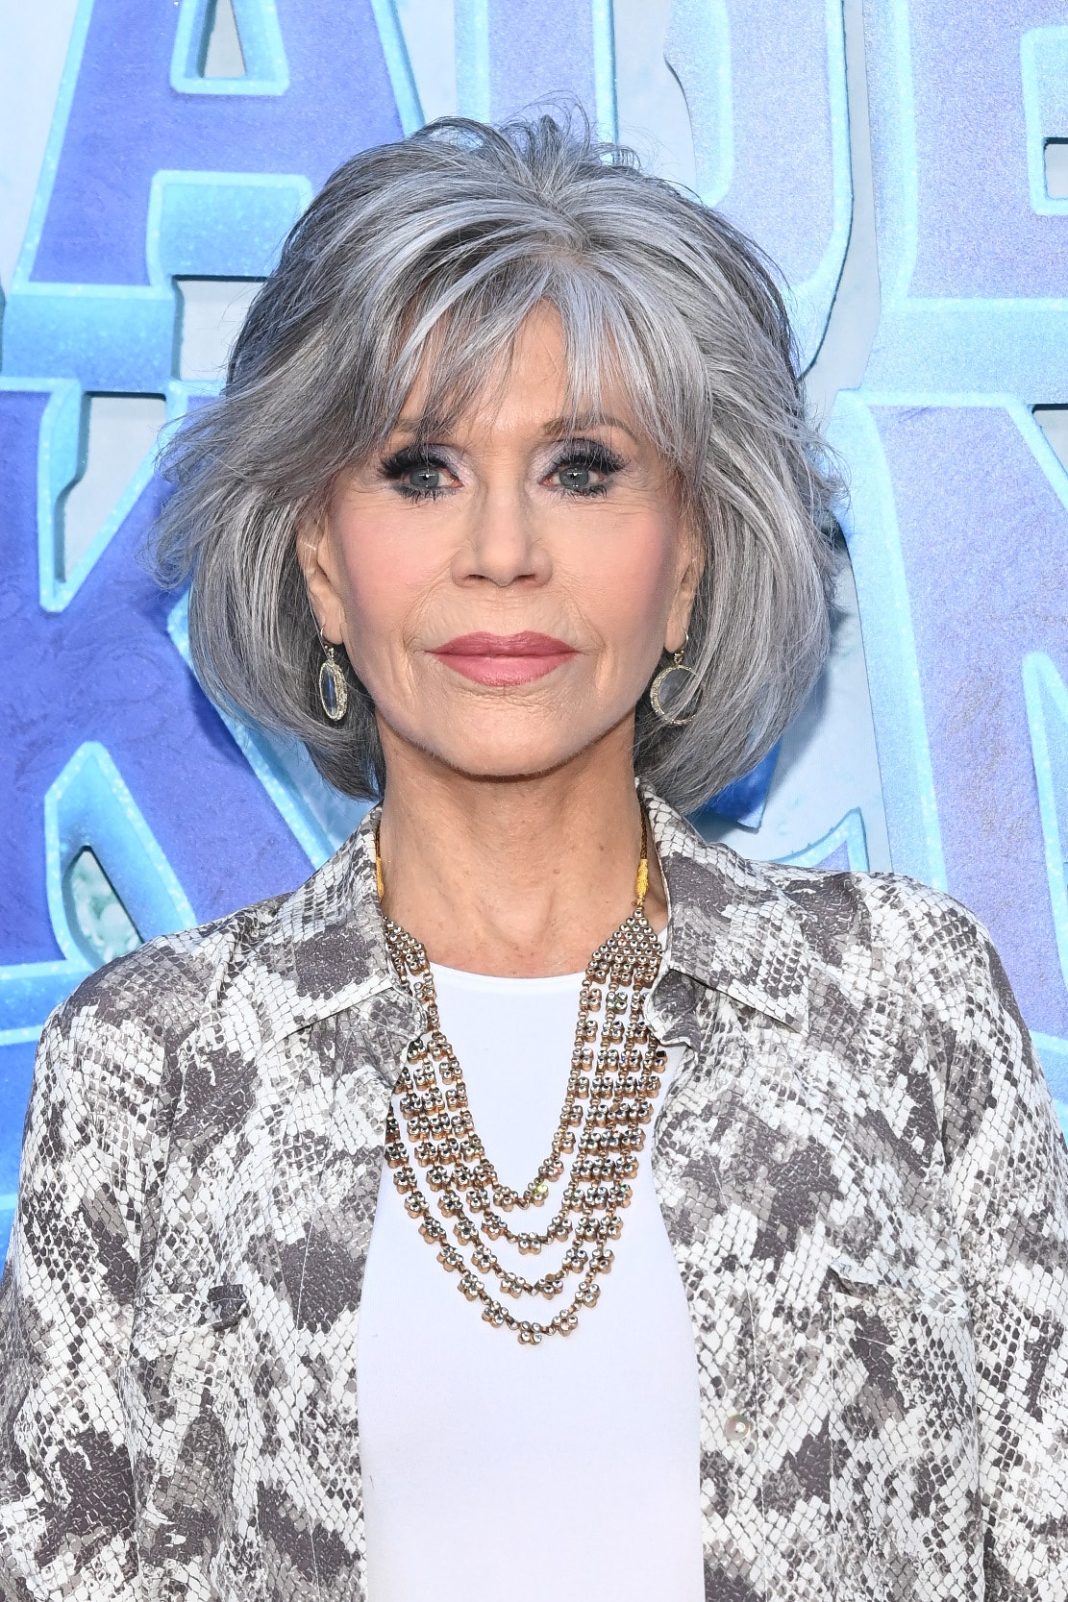 i-can’t-think-of-a-better-combo-than-jane-fonda’s-gray-hair-and-red-lip-—-see-photos